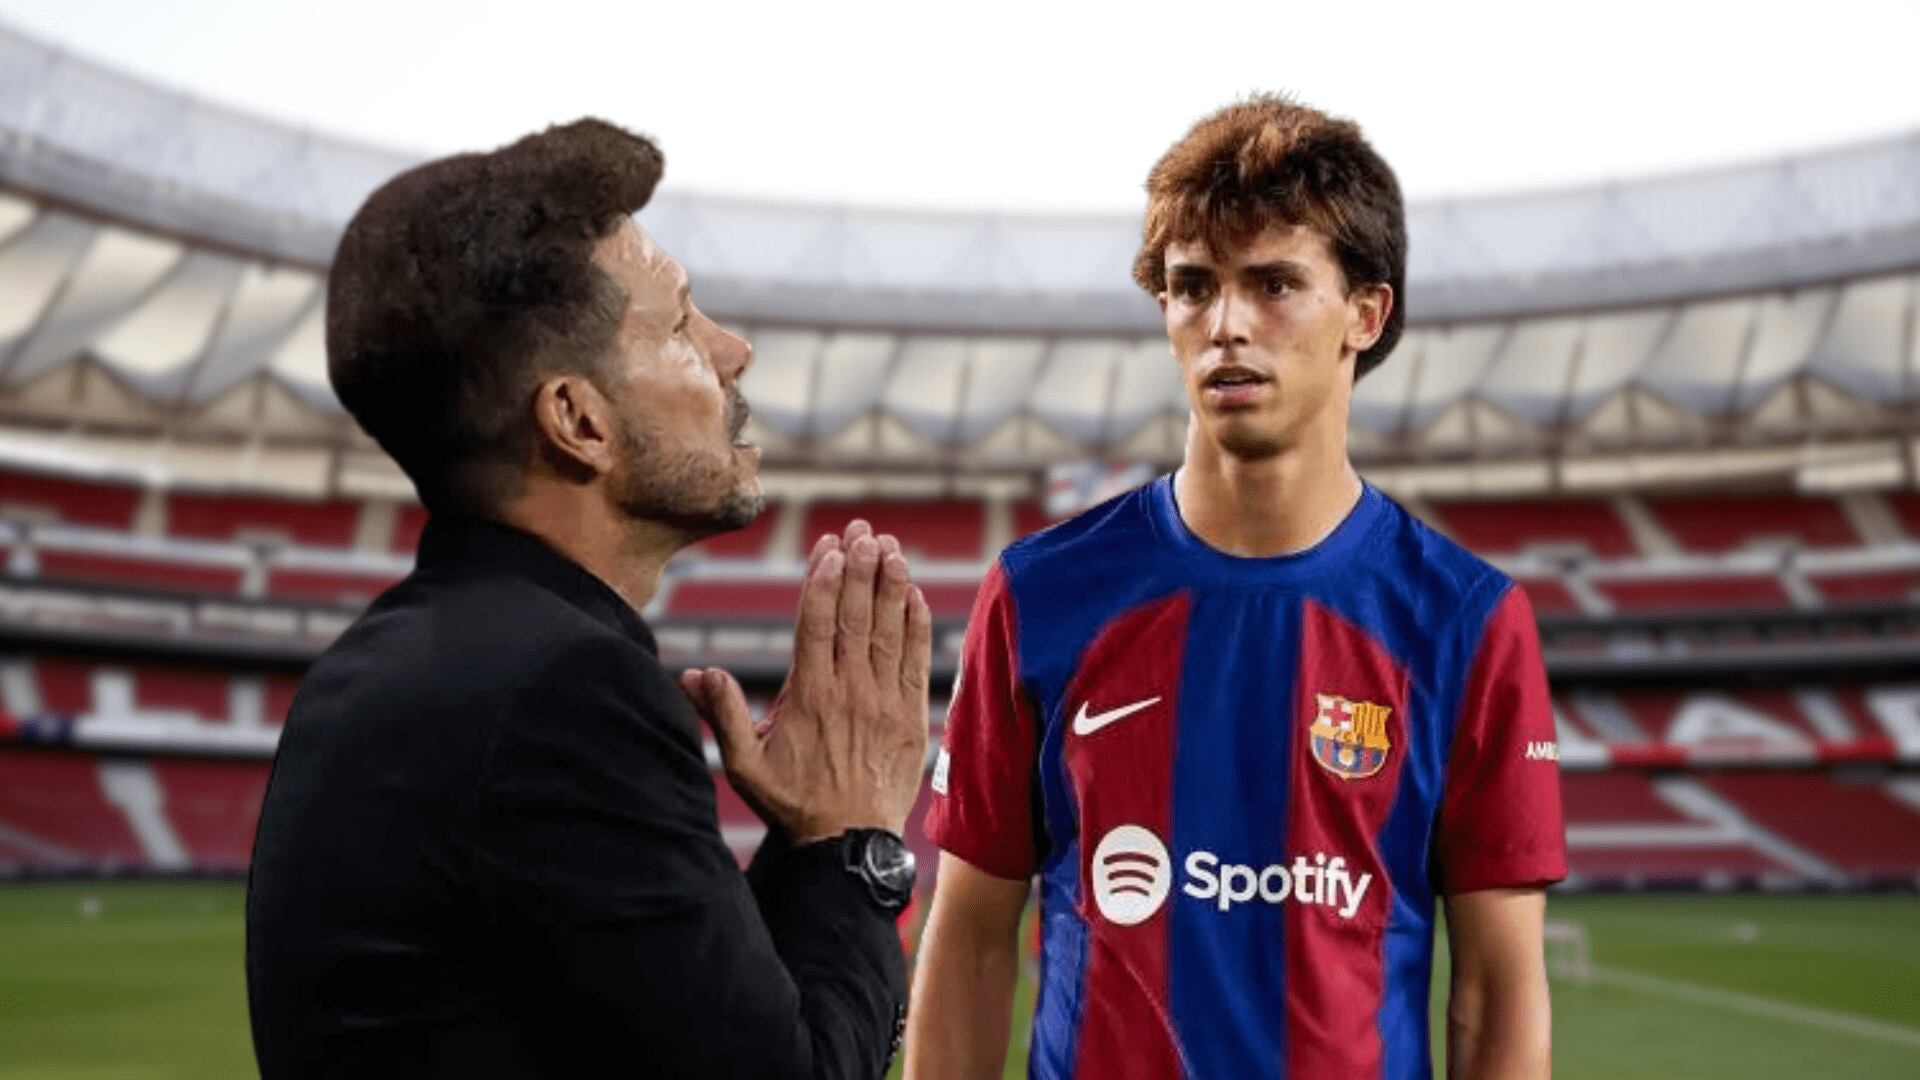 After João Félix, the player that Barça wants to get from Atlético de Madrid